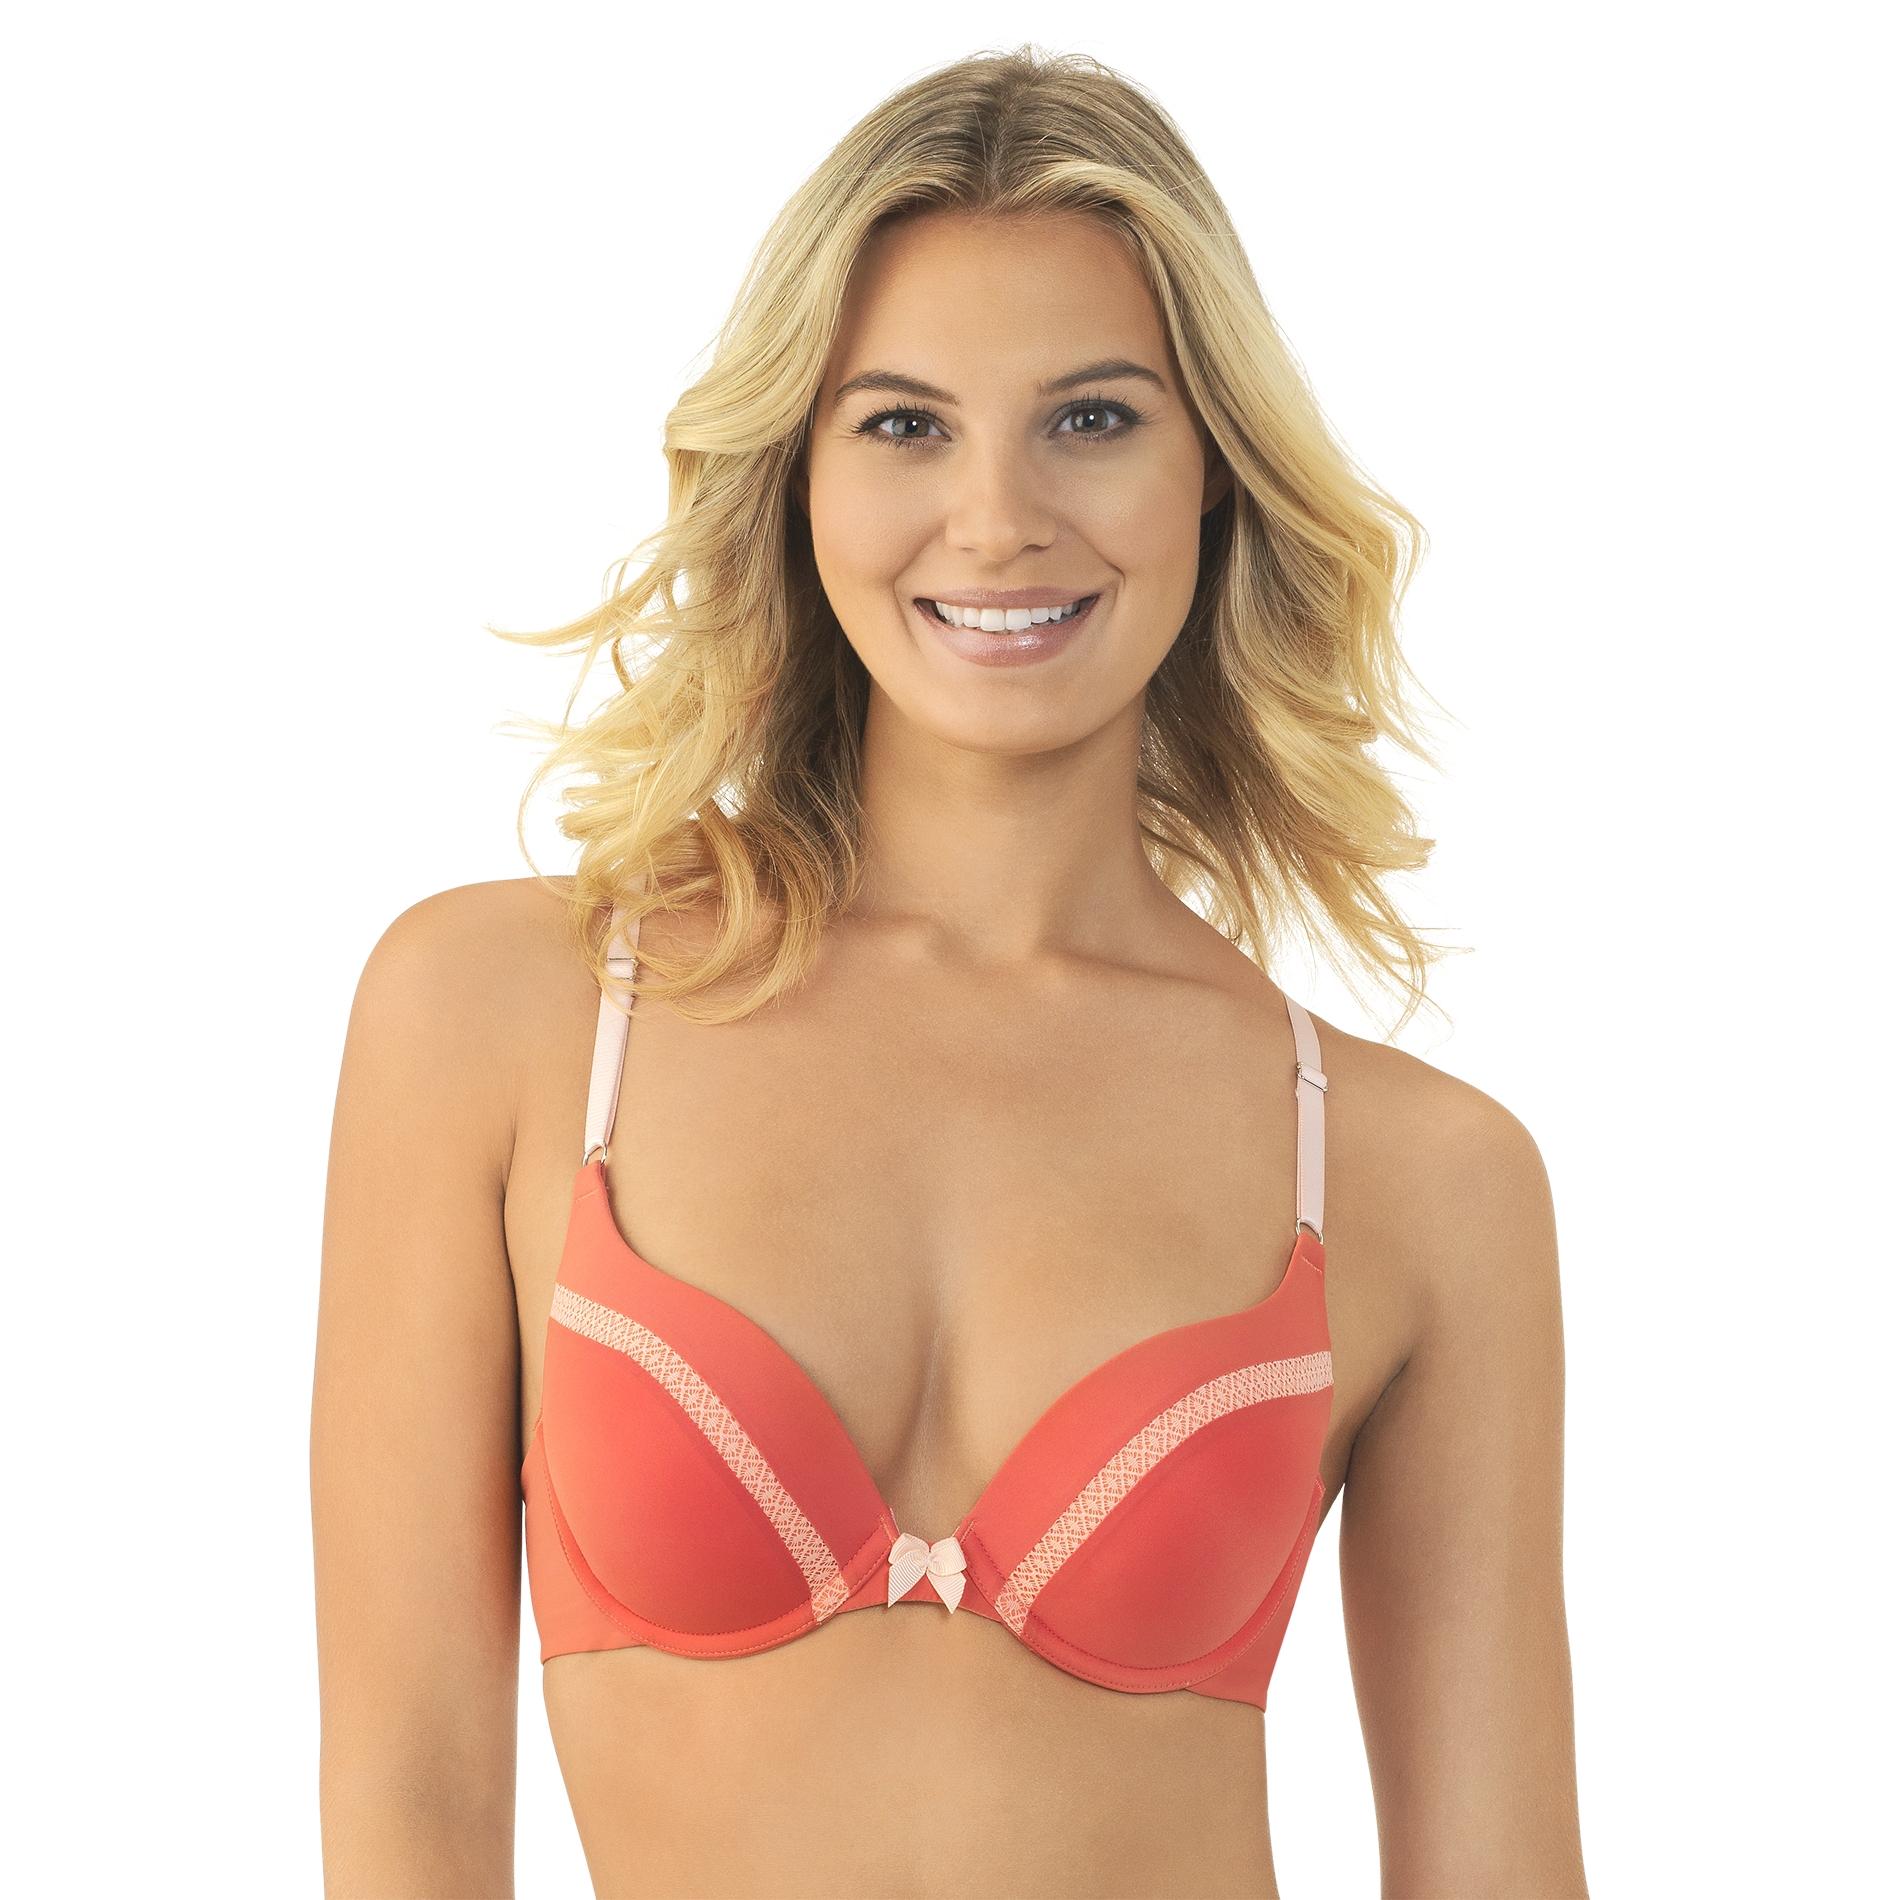 Lily of France Women's Ego Boost Push-Up Bra - 2131101